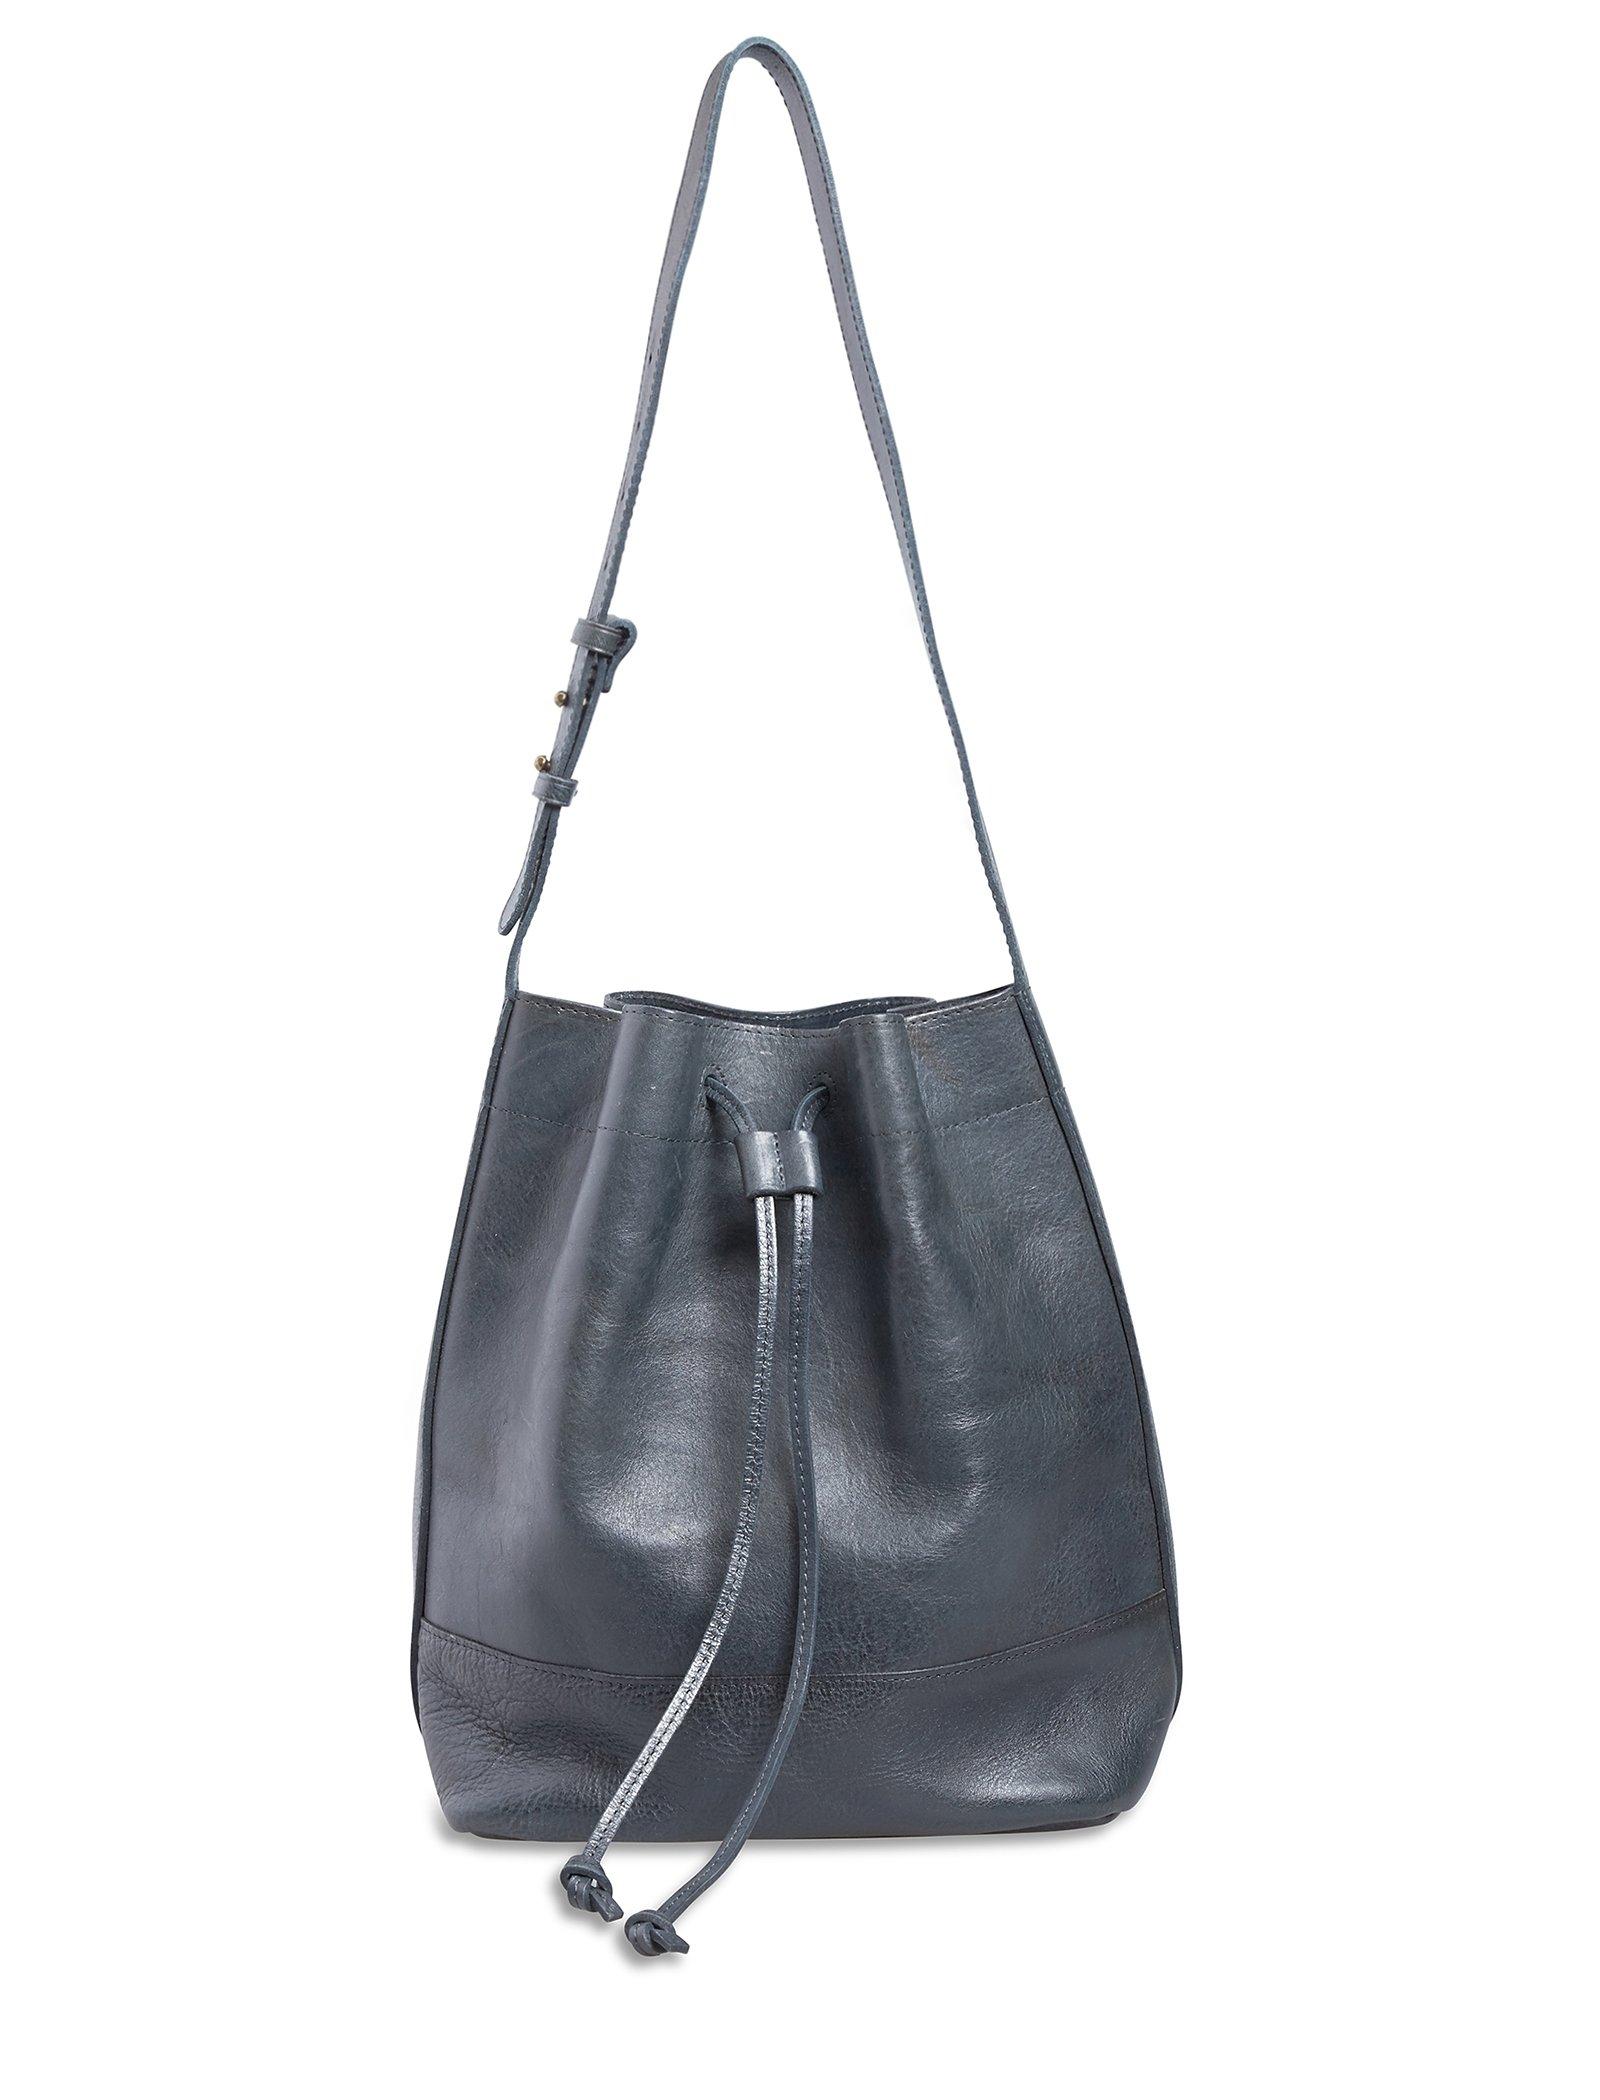 THE POINT DRAWSTRING BAG | Lucky Brand